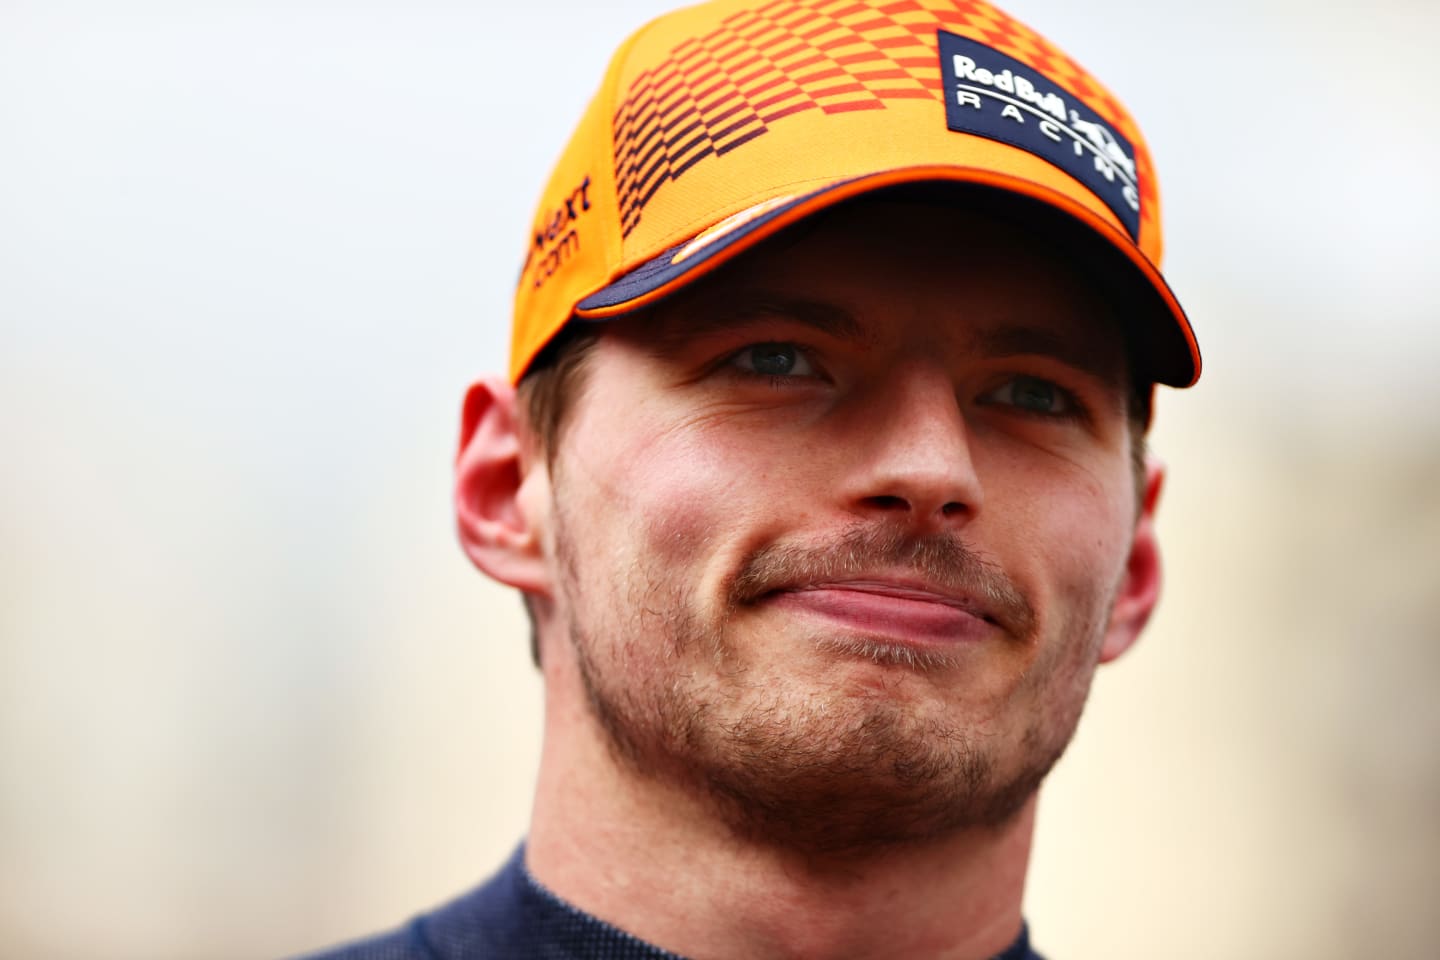 MONTE-CARLO, MONACO - MAY 22: Second place qualifier Max Verstappen of Netherlands and Red Bull